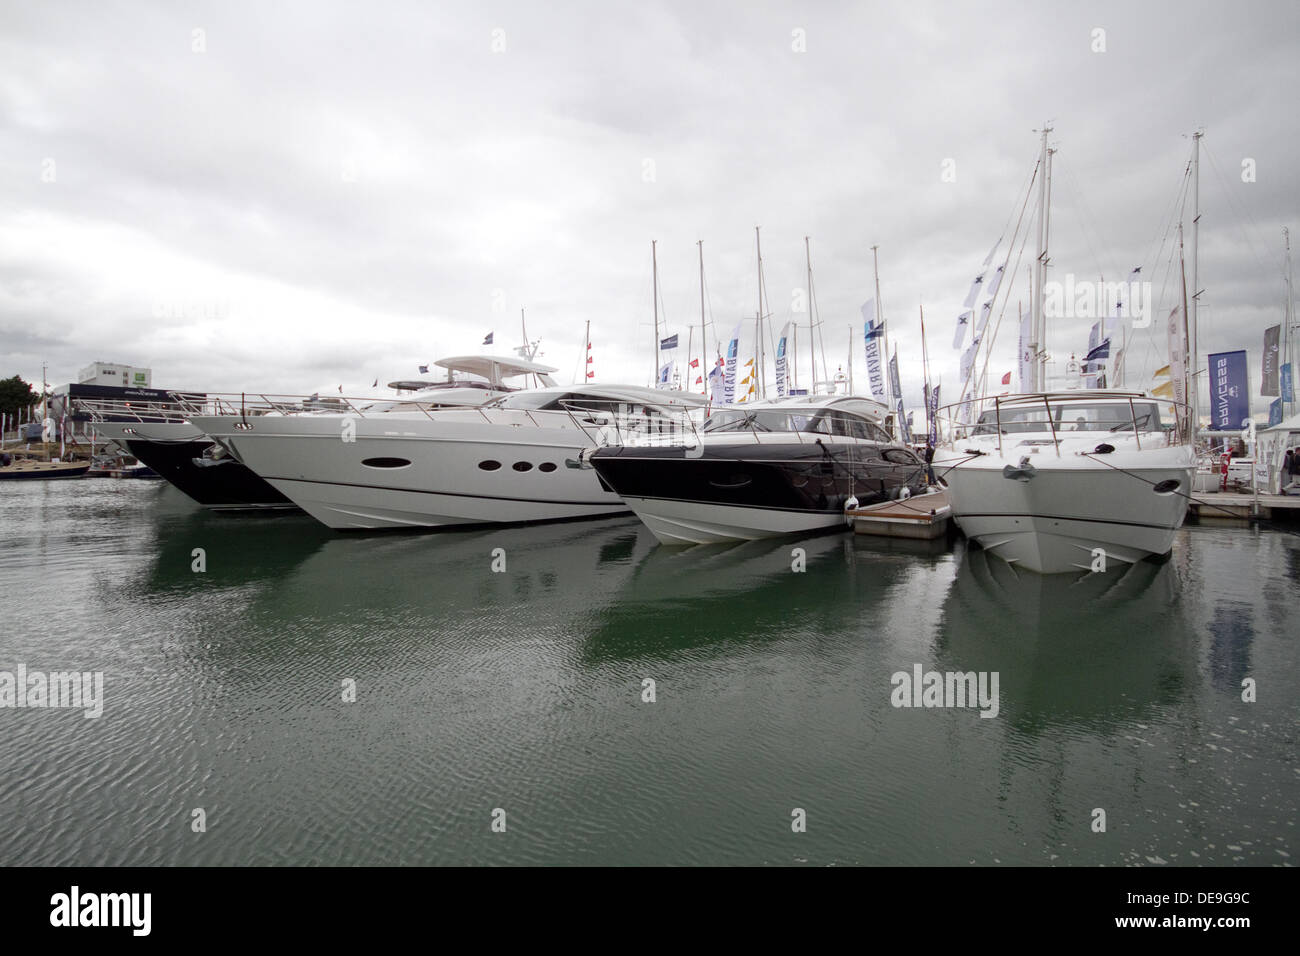 Southampton,UK,13th September 2013,Super yachts at the PSP Southampton boat show©Keith Larby/Alamy Live News Stock Photo